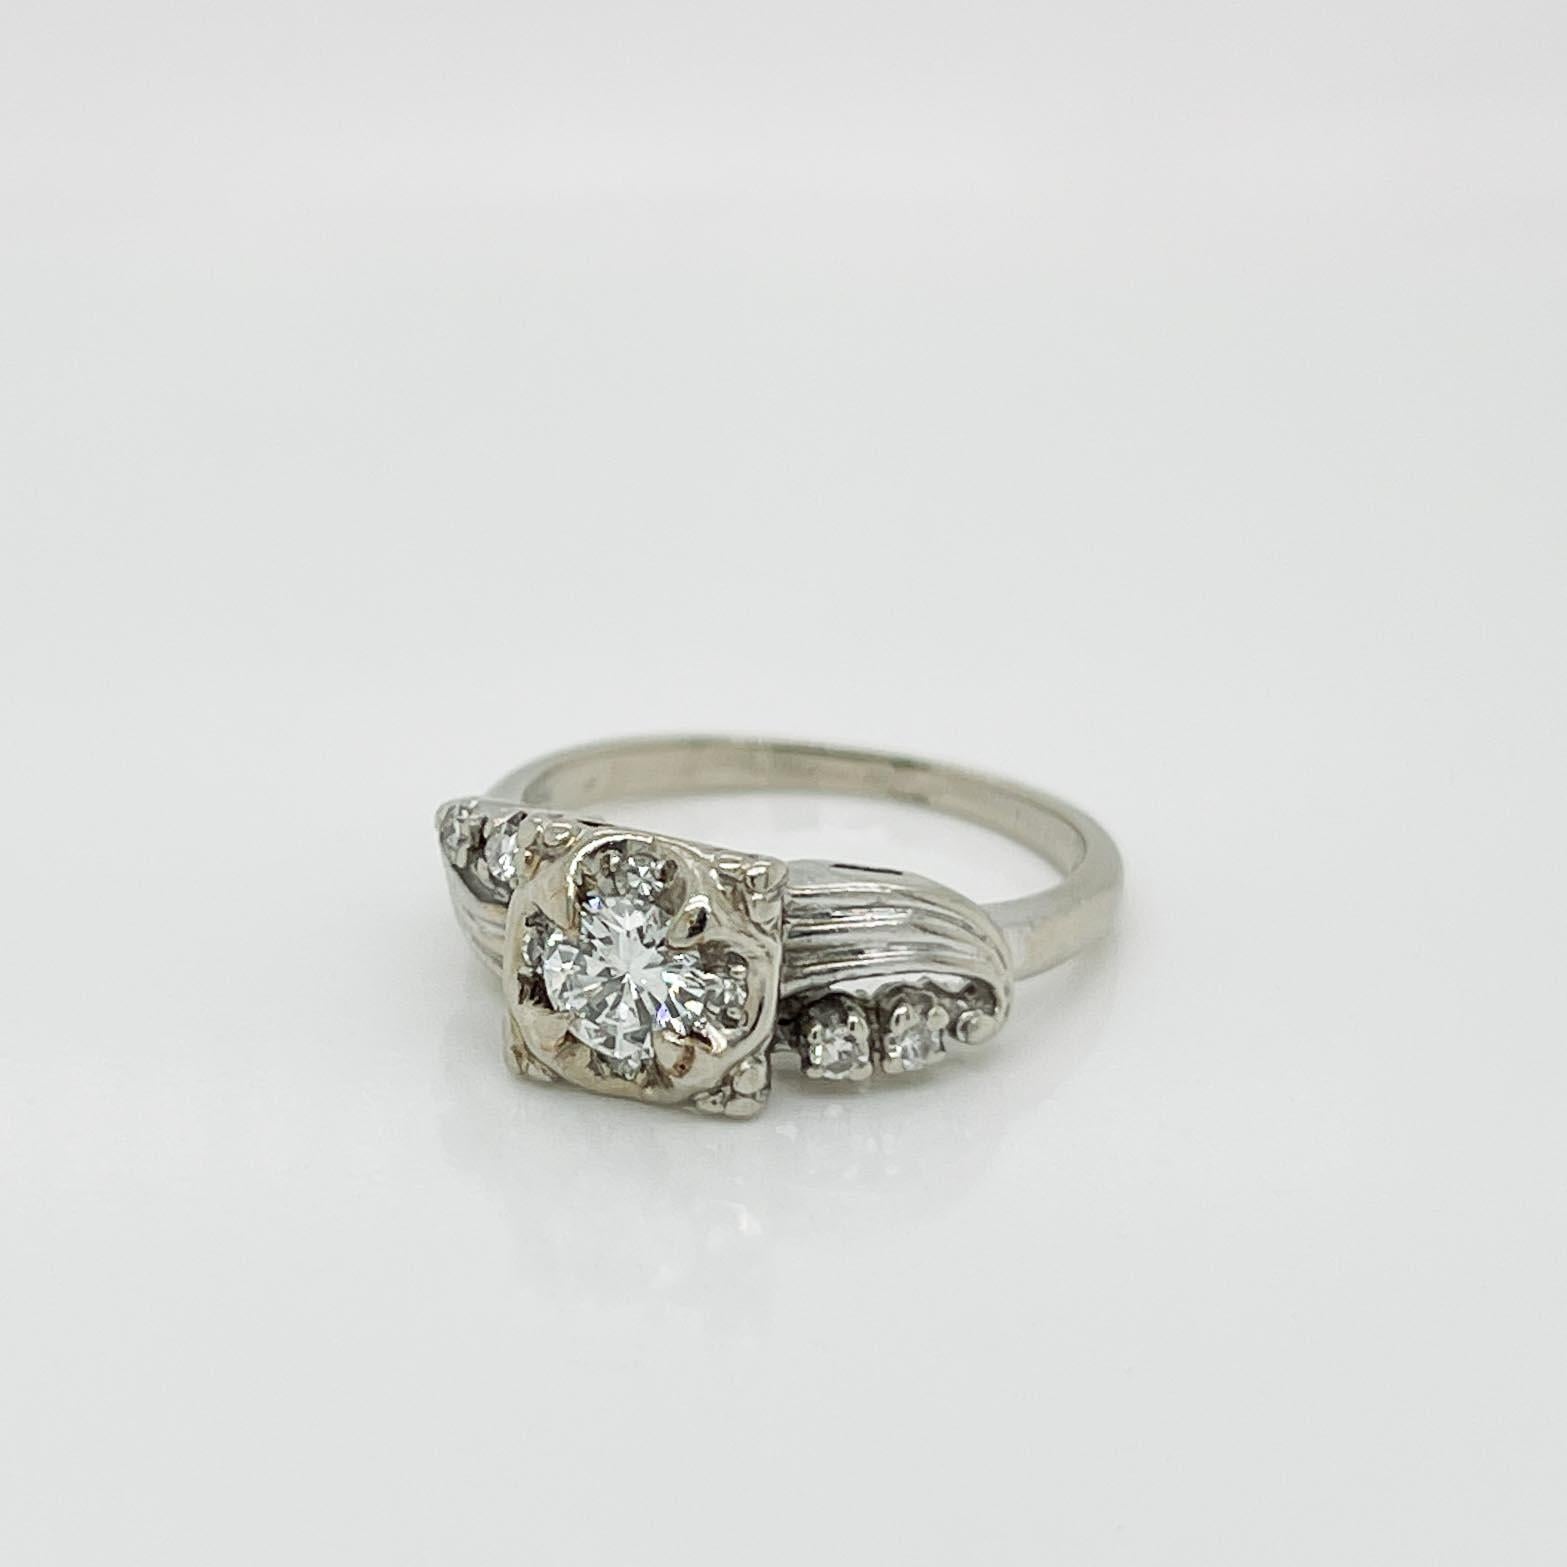 A fine Mid-Century gold & diamond engagement ring. 

In 14 karat white gold with a retro openwork design. 

Set with a round brilliant cut ca. 0.38 ct. white diamond prong set in the center of its S-curved setting and accented by 8 small round